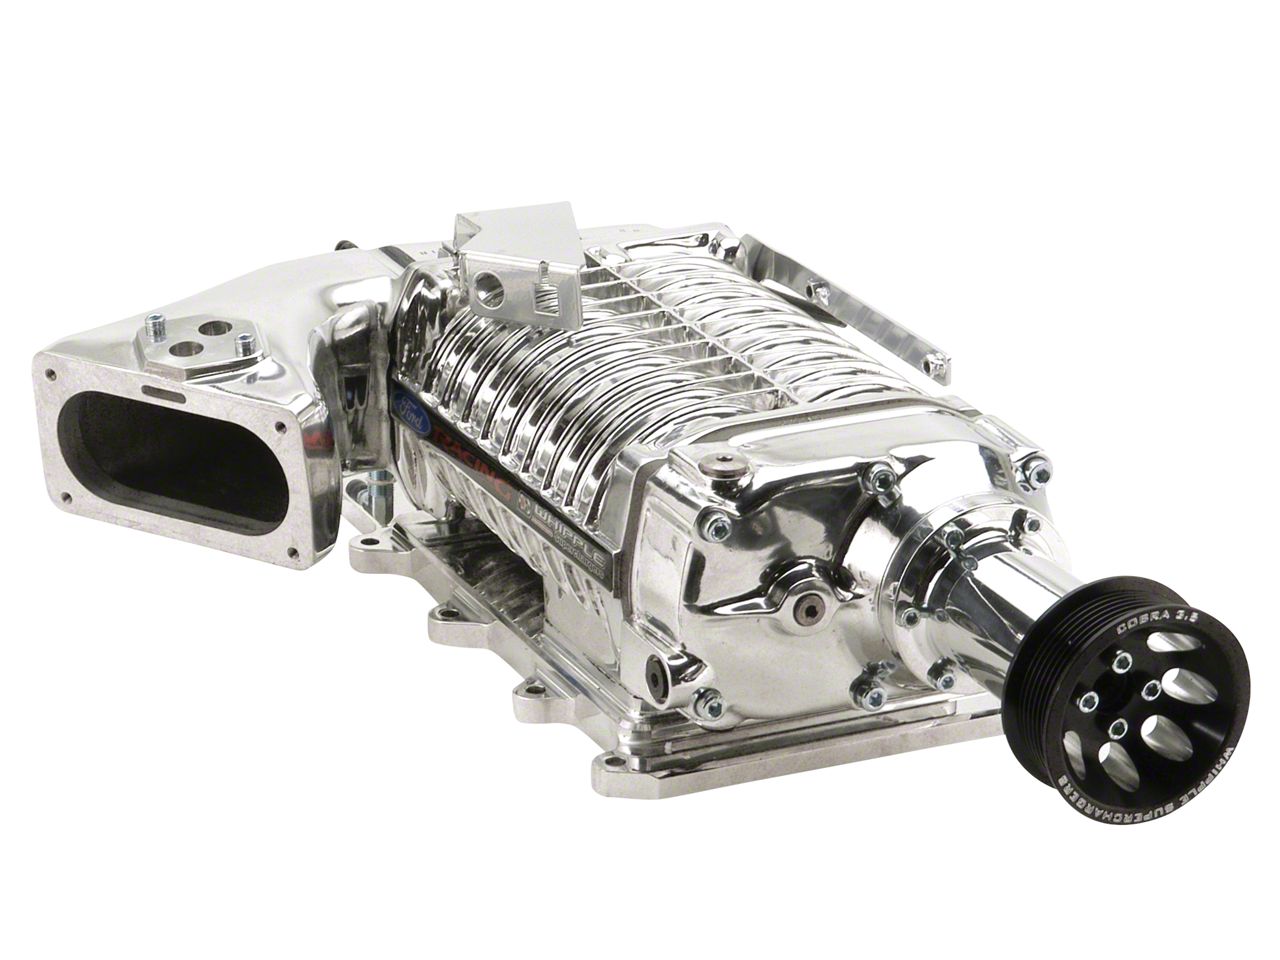 Ford racing whipple supercharger 03 cobra #5